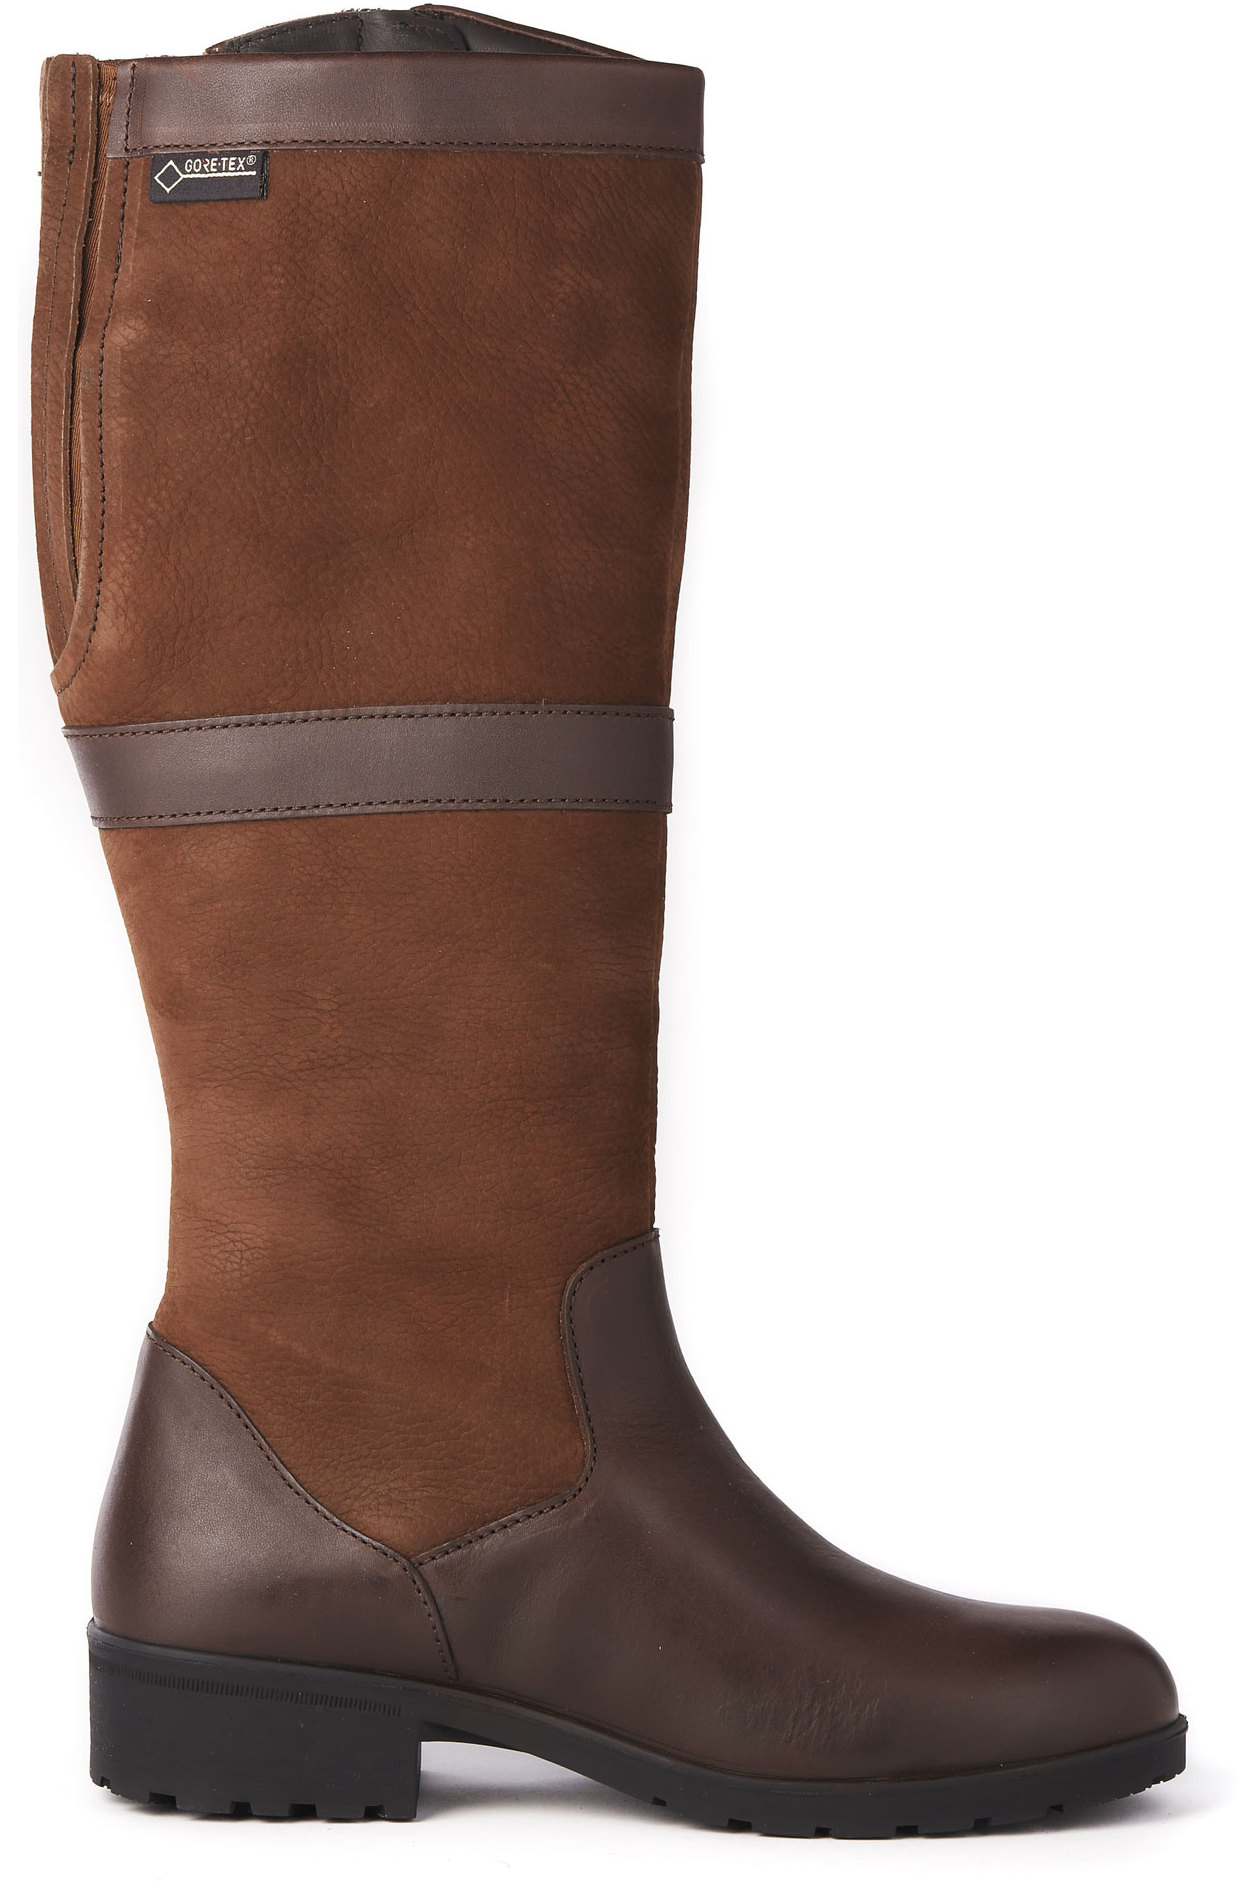 Dubarry Womens Sligo Country Boots | The Drill Shed | The Drillshed